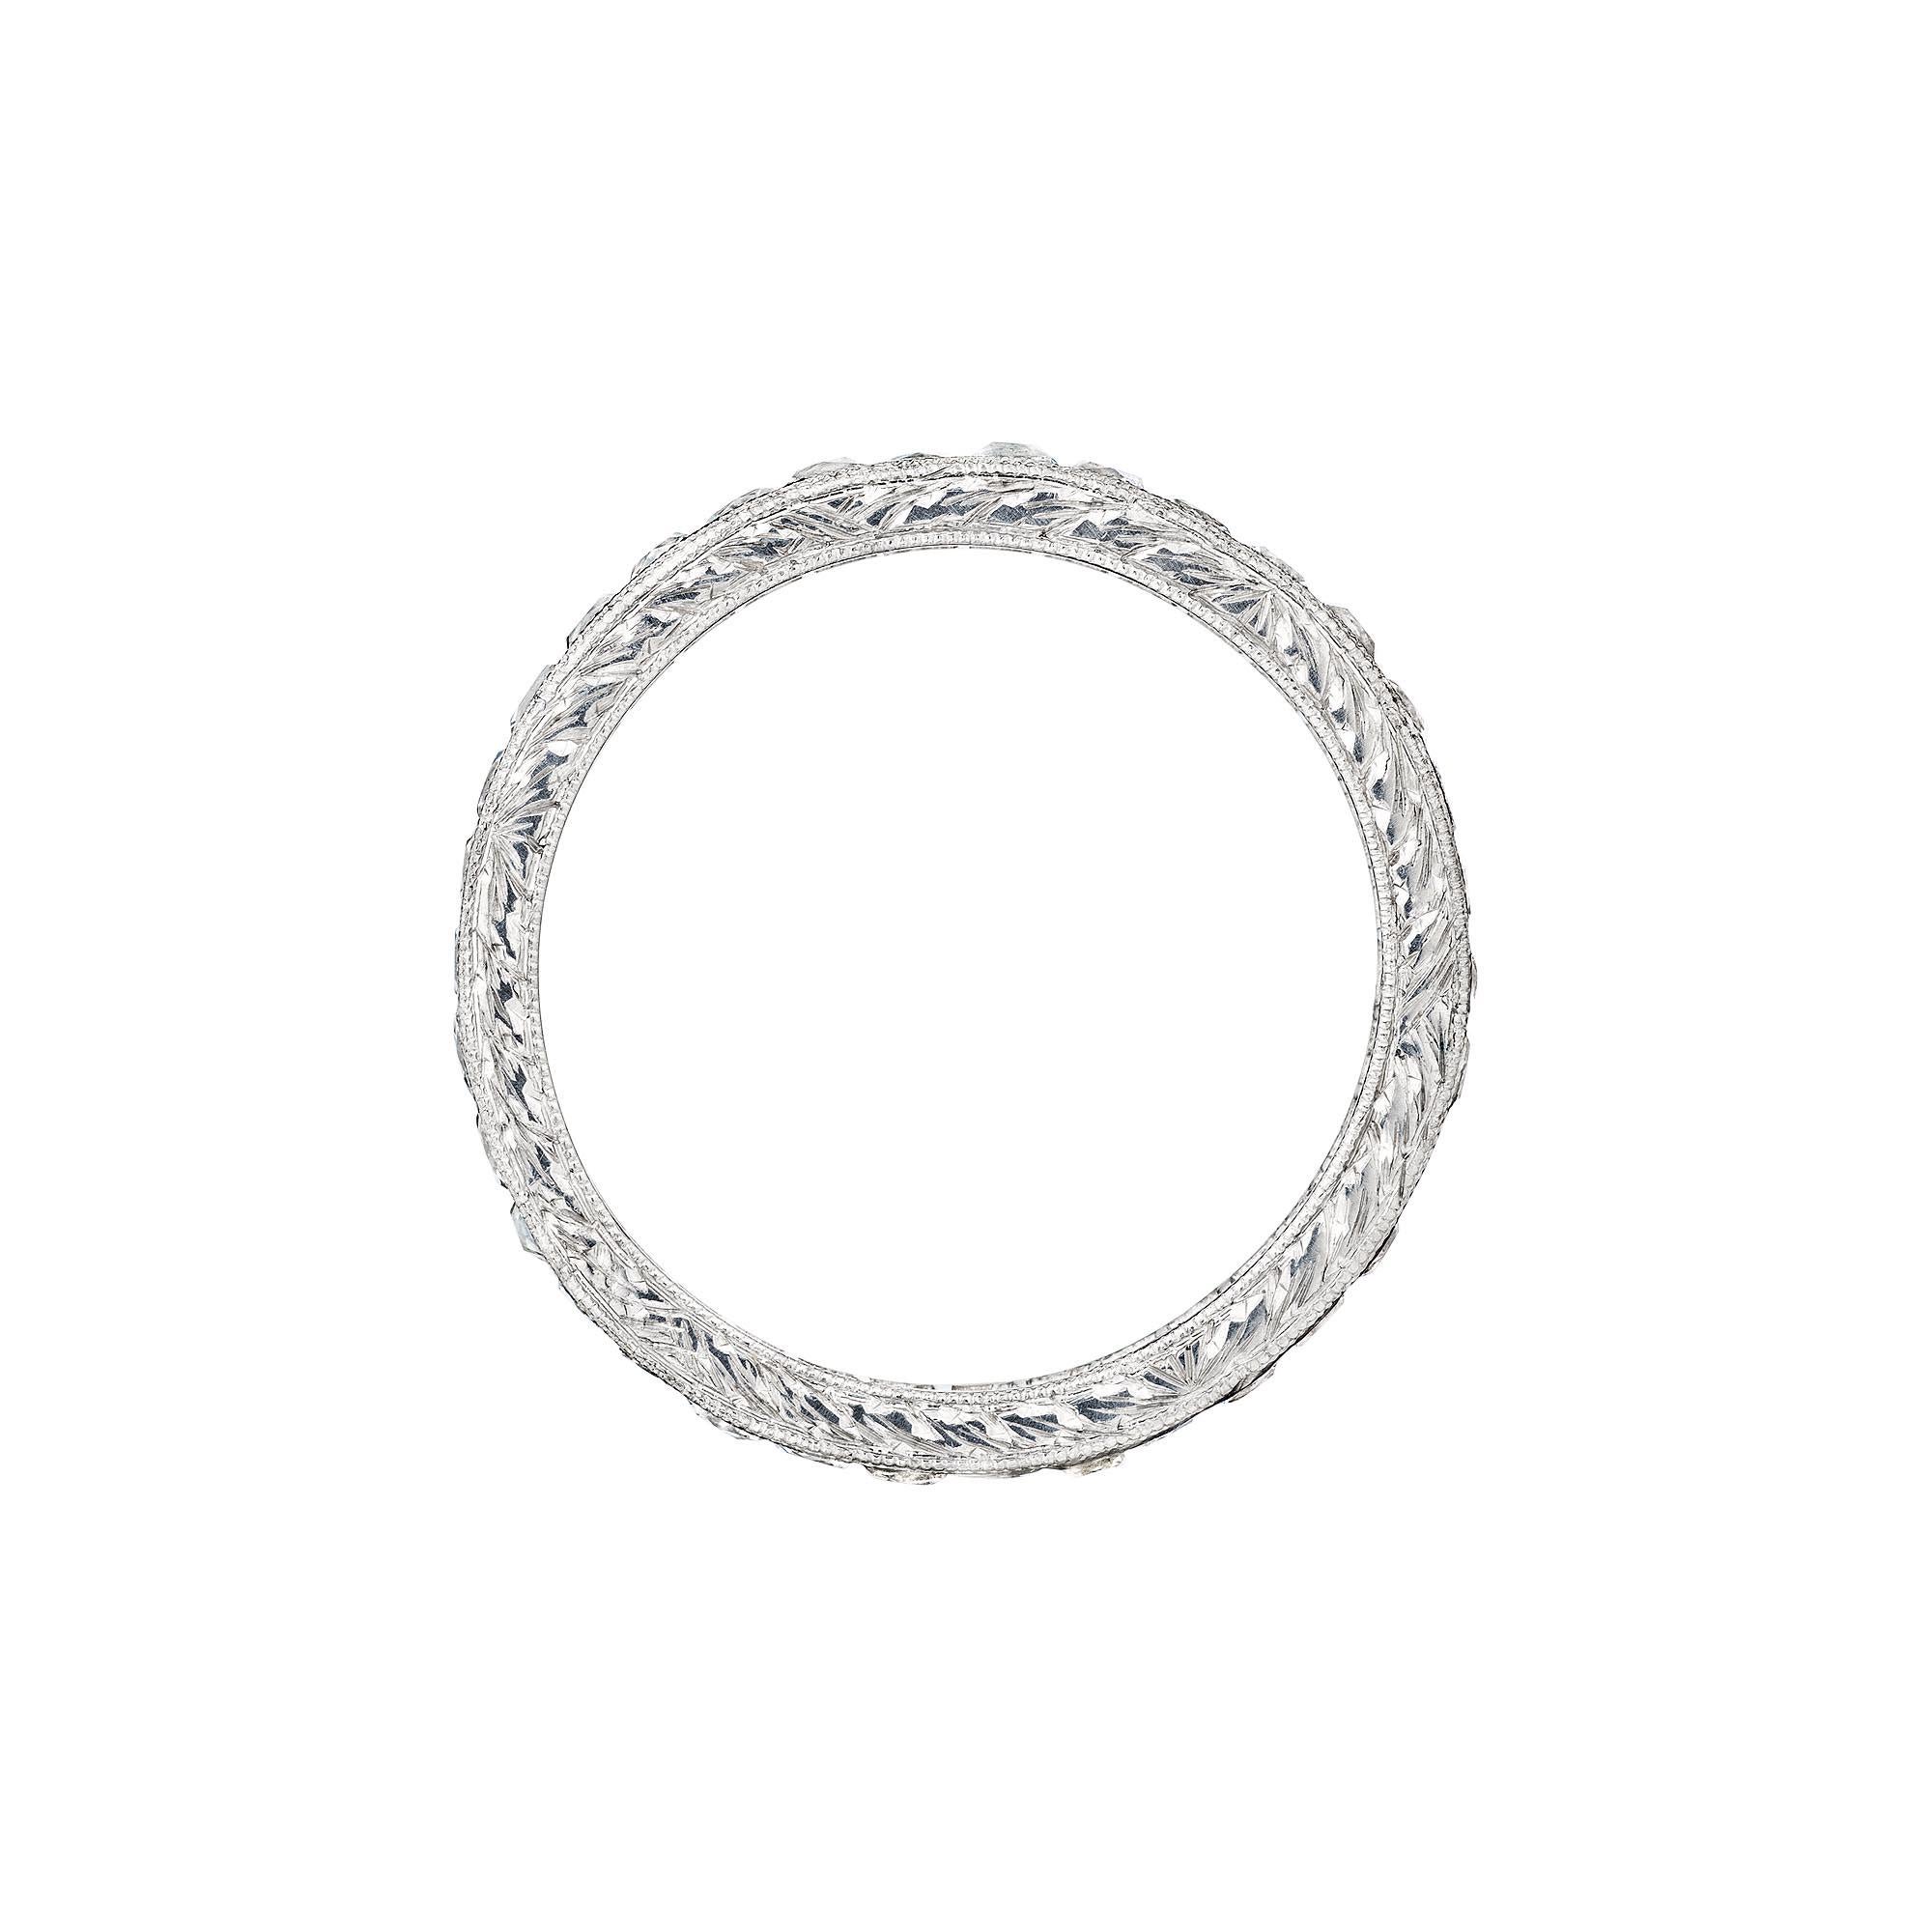 Circle yourself in light with this enchanting Tiffany & Co. art deco French cut diamond platinum eternity band ring.  Signed.  Circa 1930.  Total approximate diamond weight is 1.75 carats.  F-H color.  VS1-2 clarity.  Size 6 1/2.